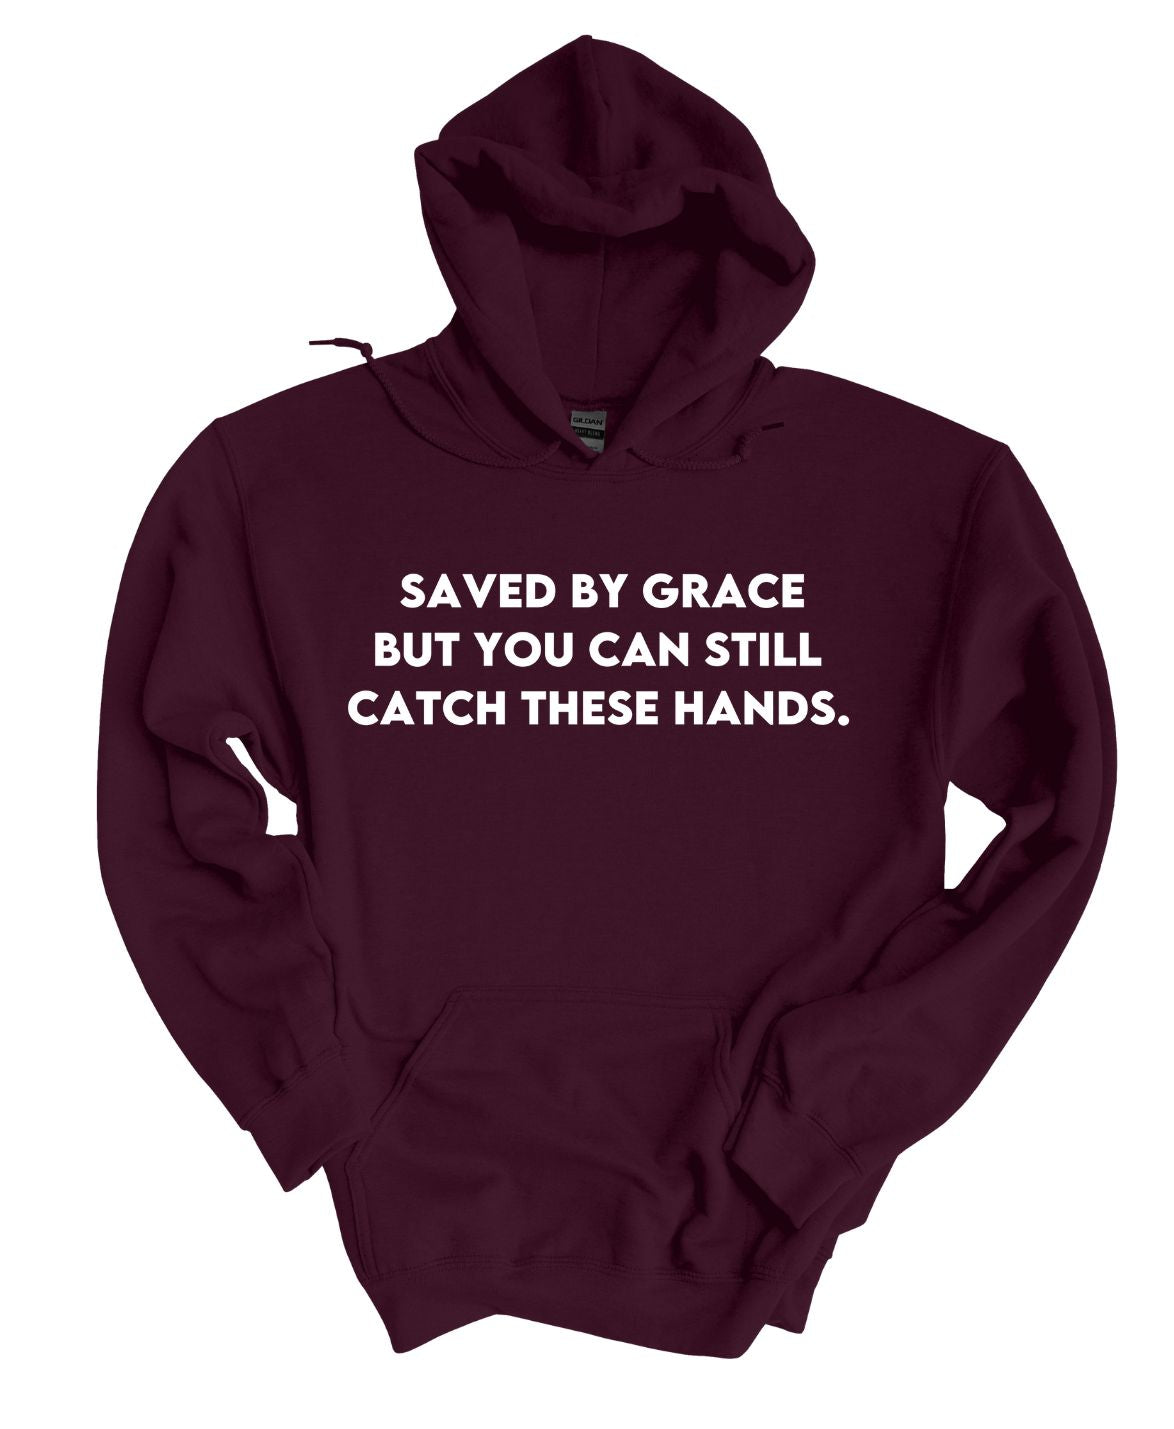 Save by grace- But you can still catch these hands Hoodie